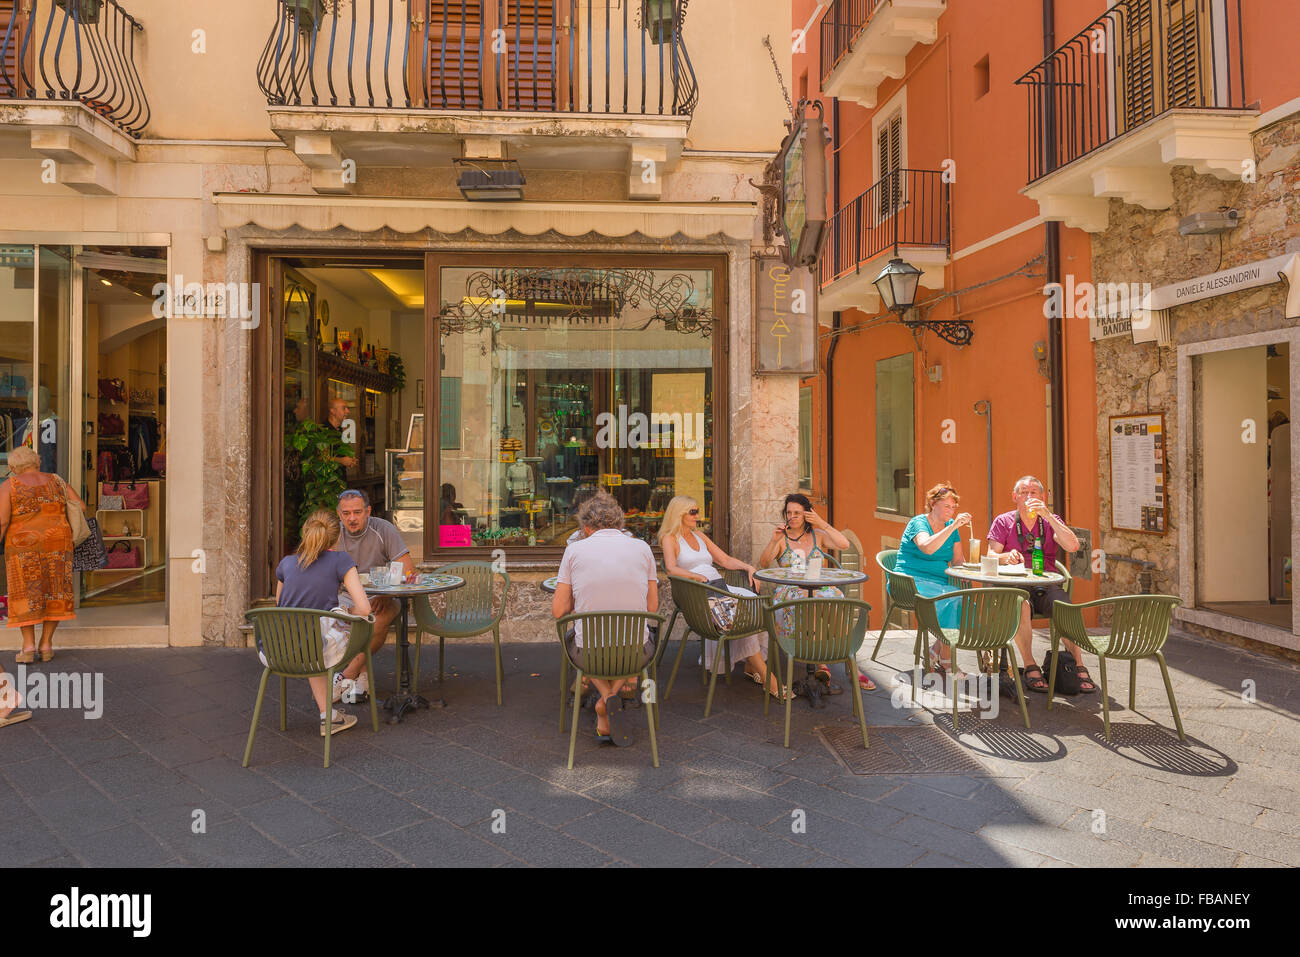 Taormina cafe bar, view in summer of tourists relaxing at tables outside a cafe on the Corso Umberto I in Taormina, Sicily. Stock Photo